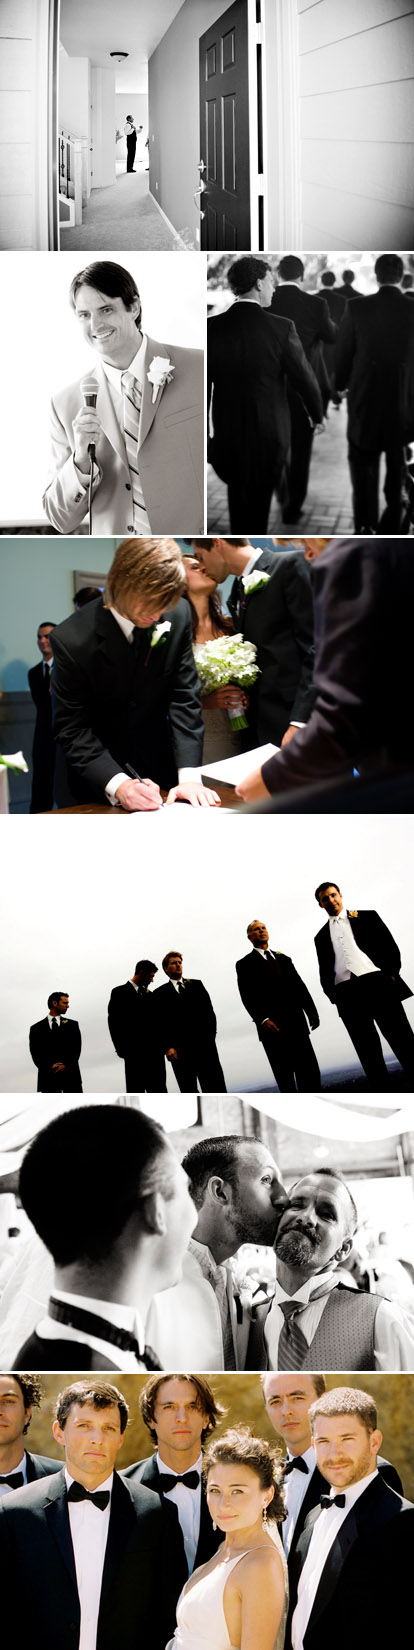 Choosing your best man for your wedding